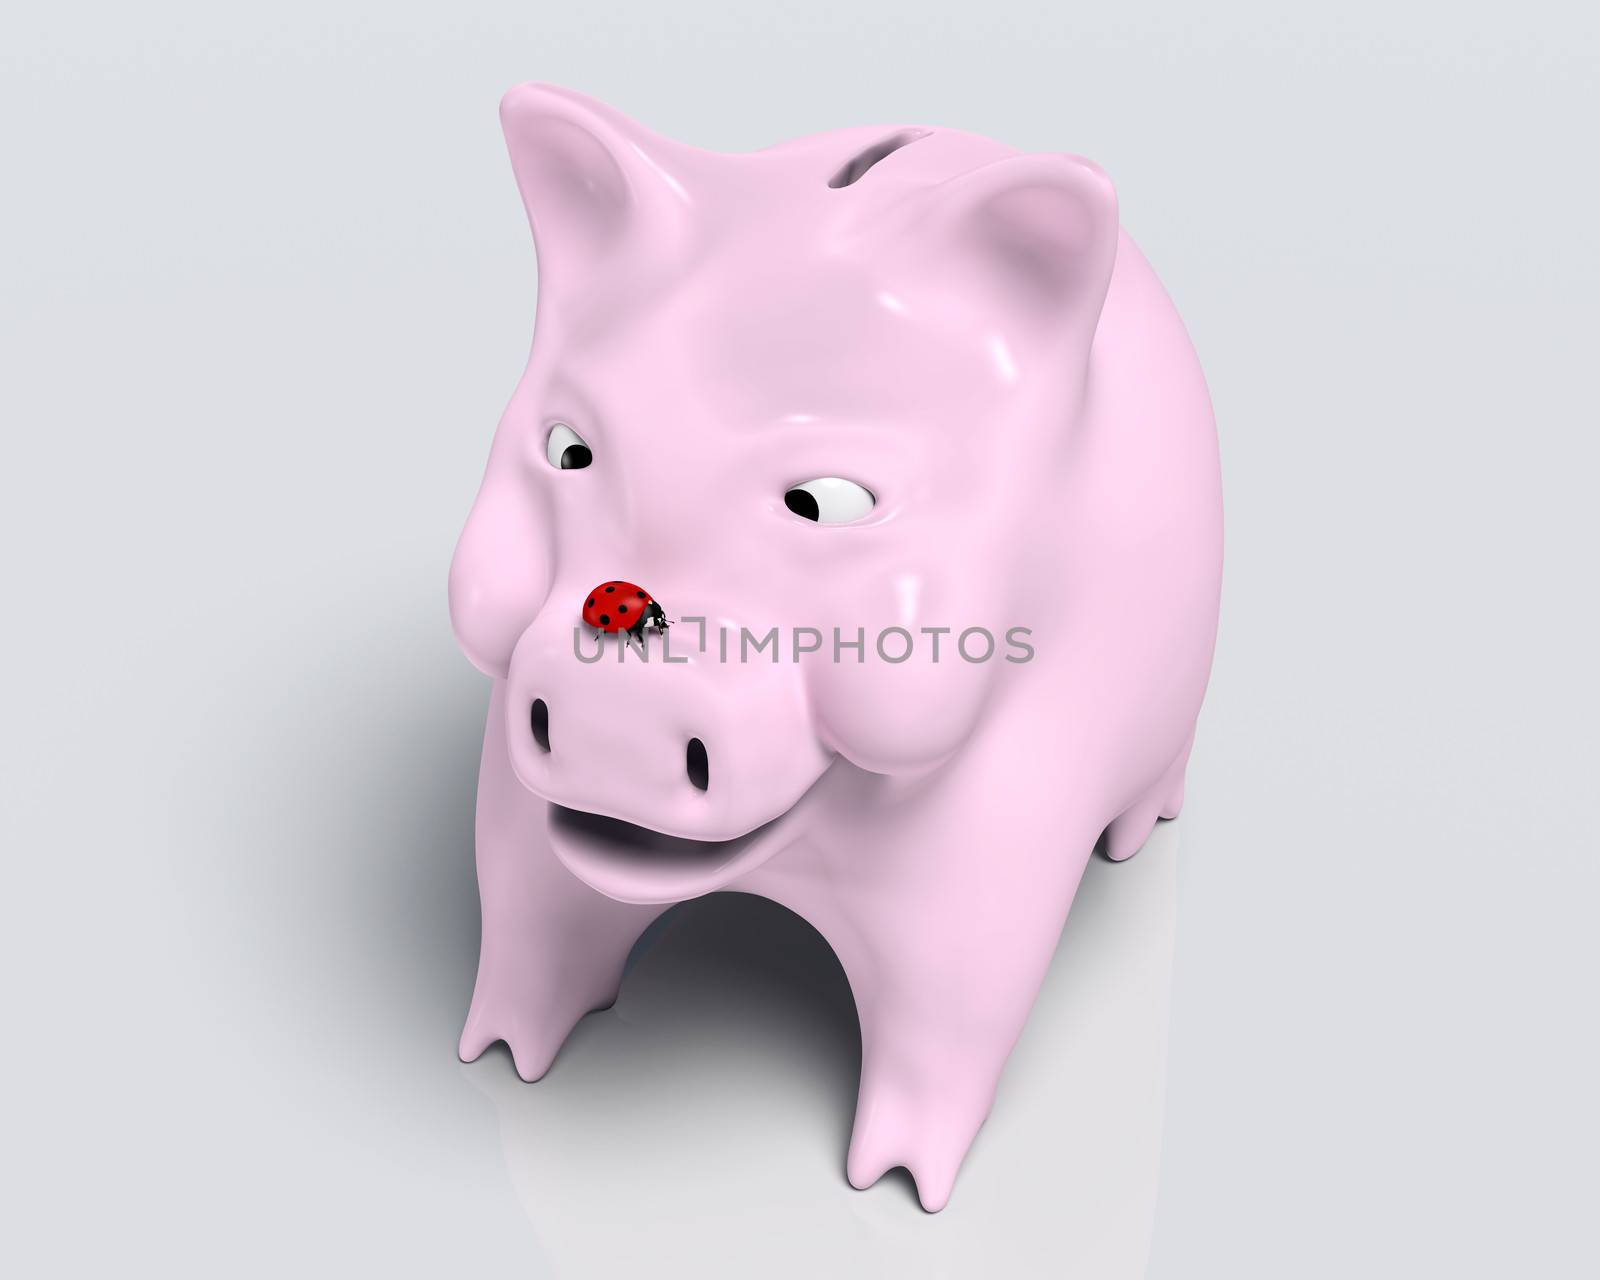 Smiling piggy bank with ladybug on nose by TaiChesco